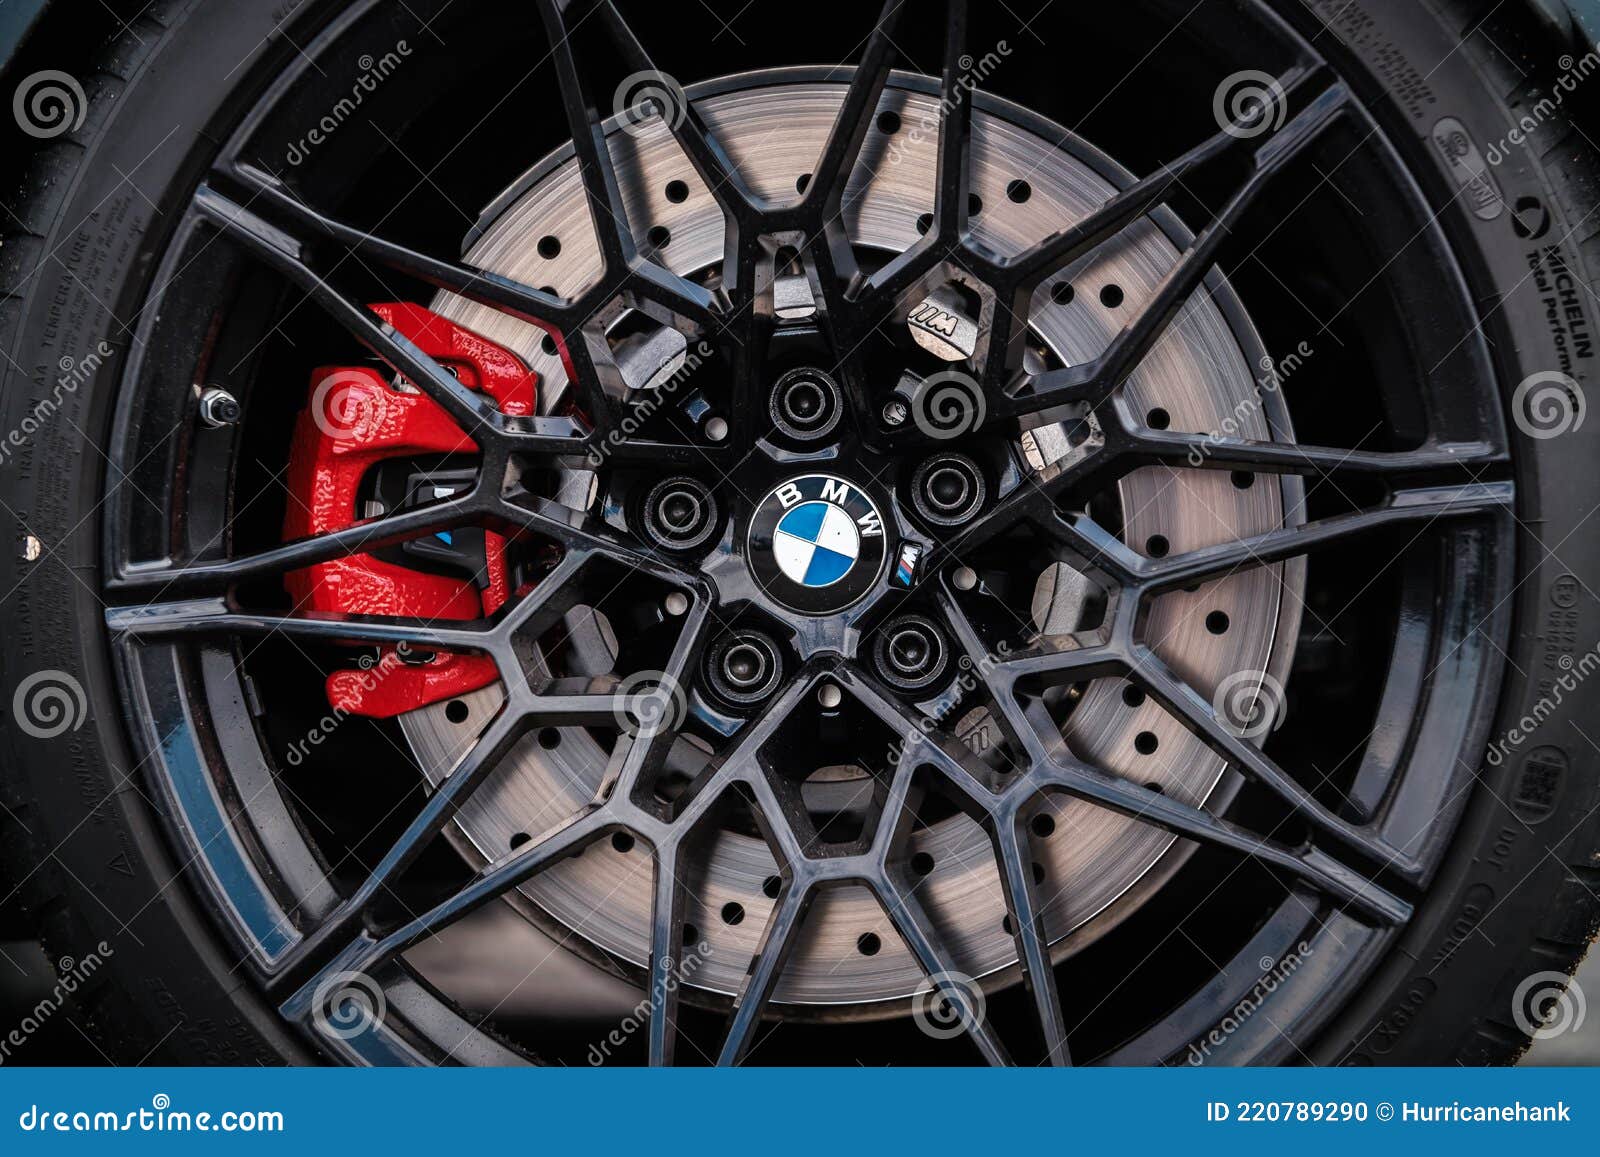 BMW M Power Performance Tuning Parts on Car Show. AC Schnitzer Rims with Low Profile Racing Tires and Editorial Image - Image of design, forged: 220789290